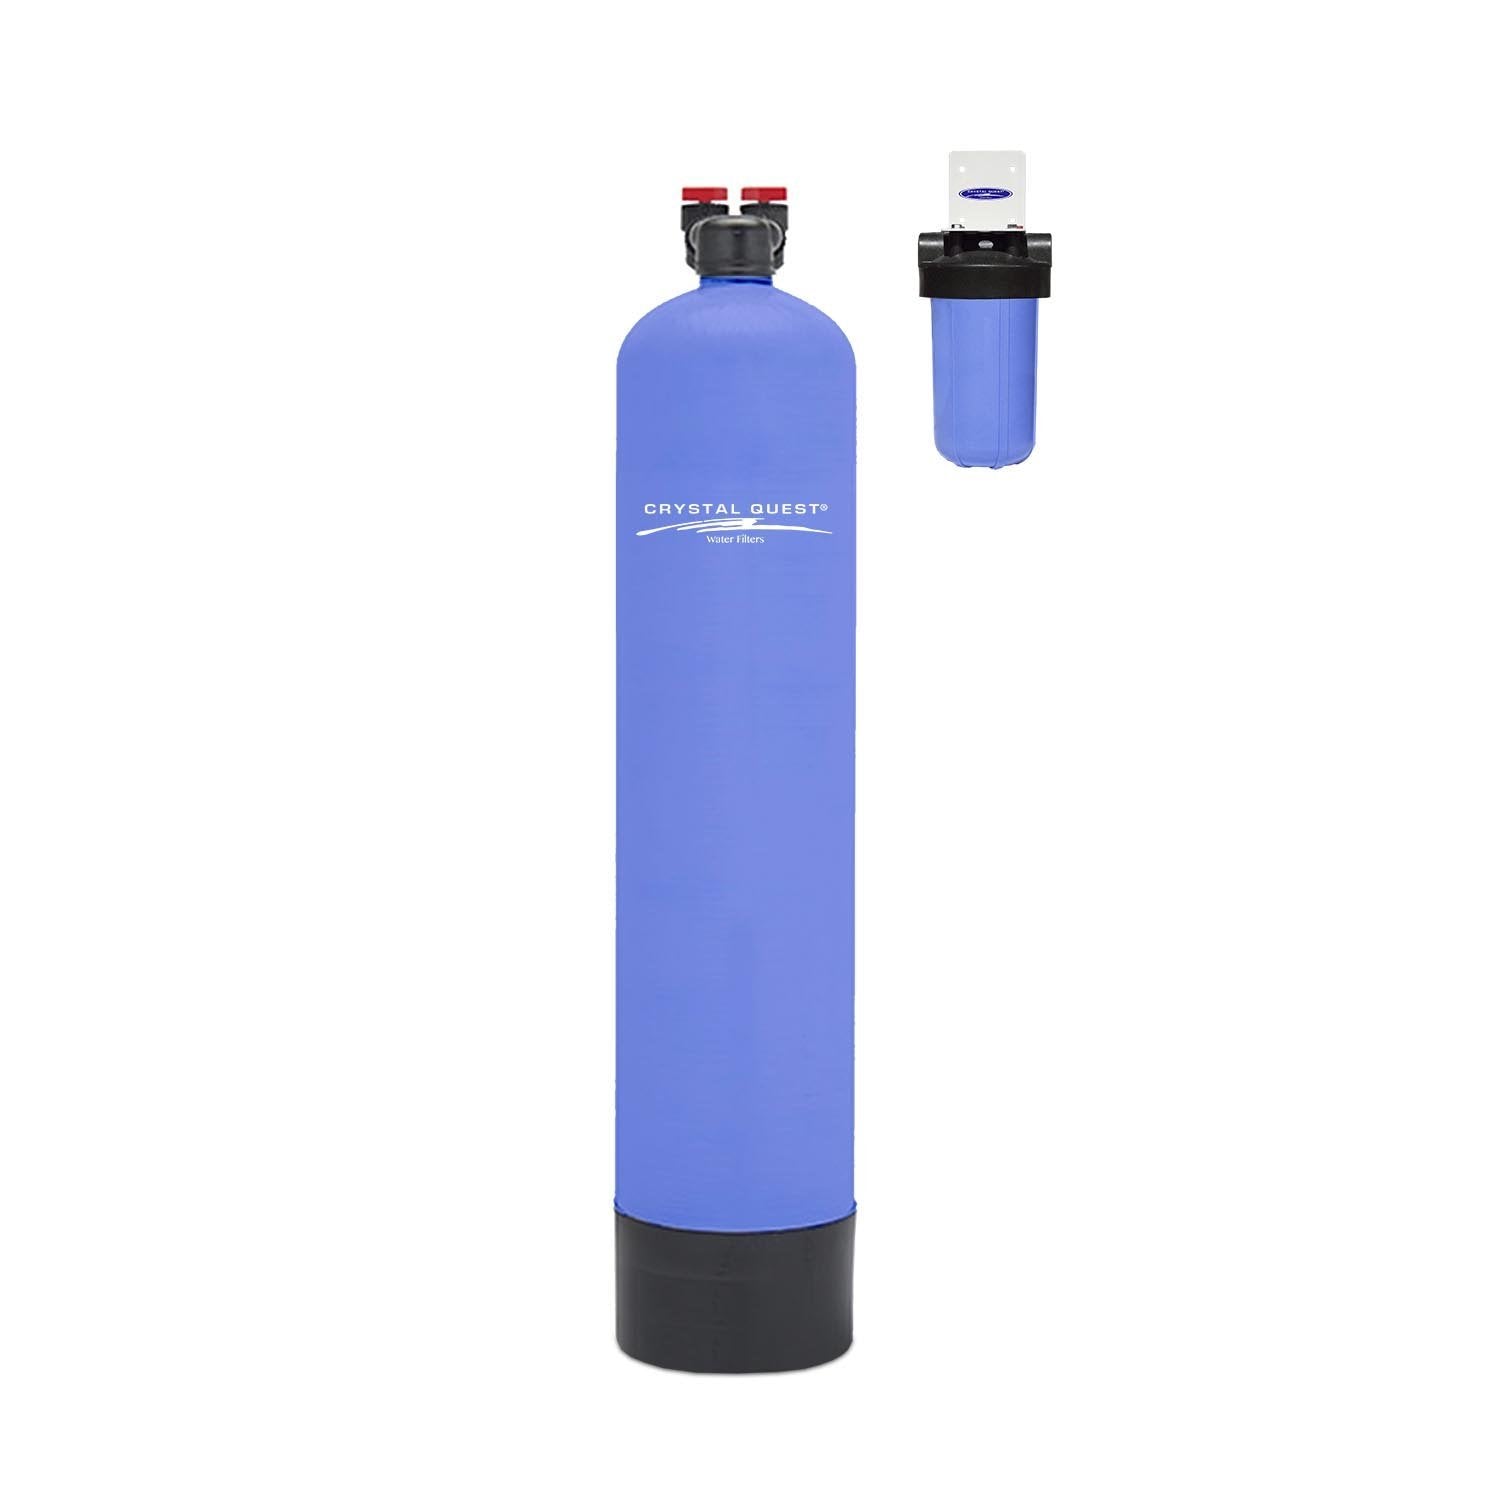 Guardian Whole House Water Filter - Whole House Water Filters - Crystal Quest Water Filters